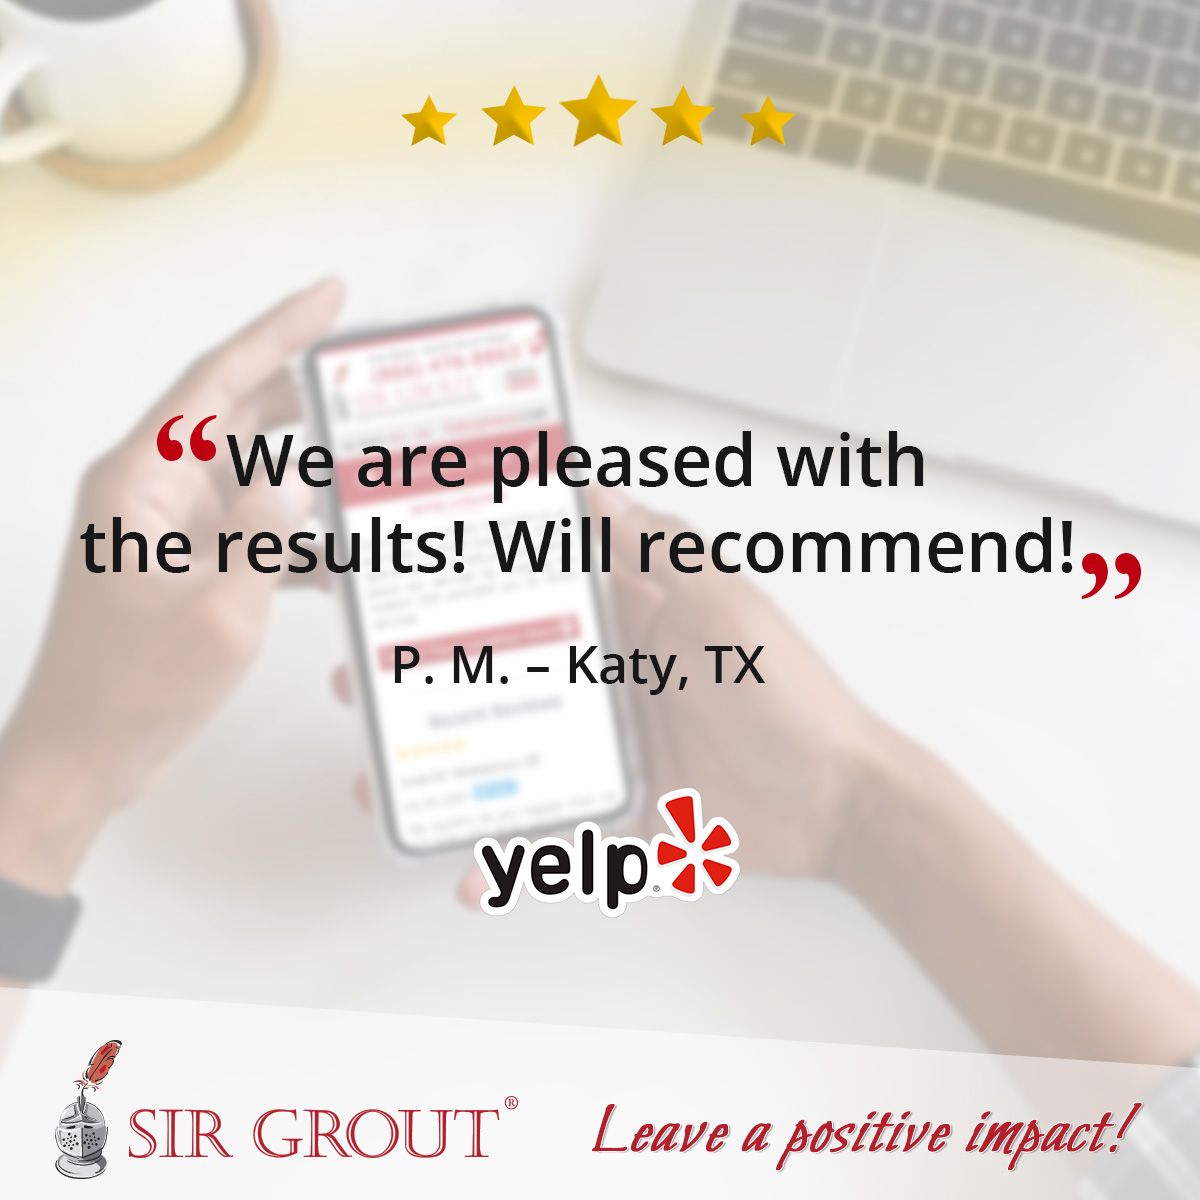 We are pleased with the results! Will recommend!